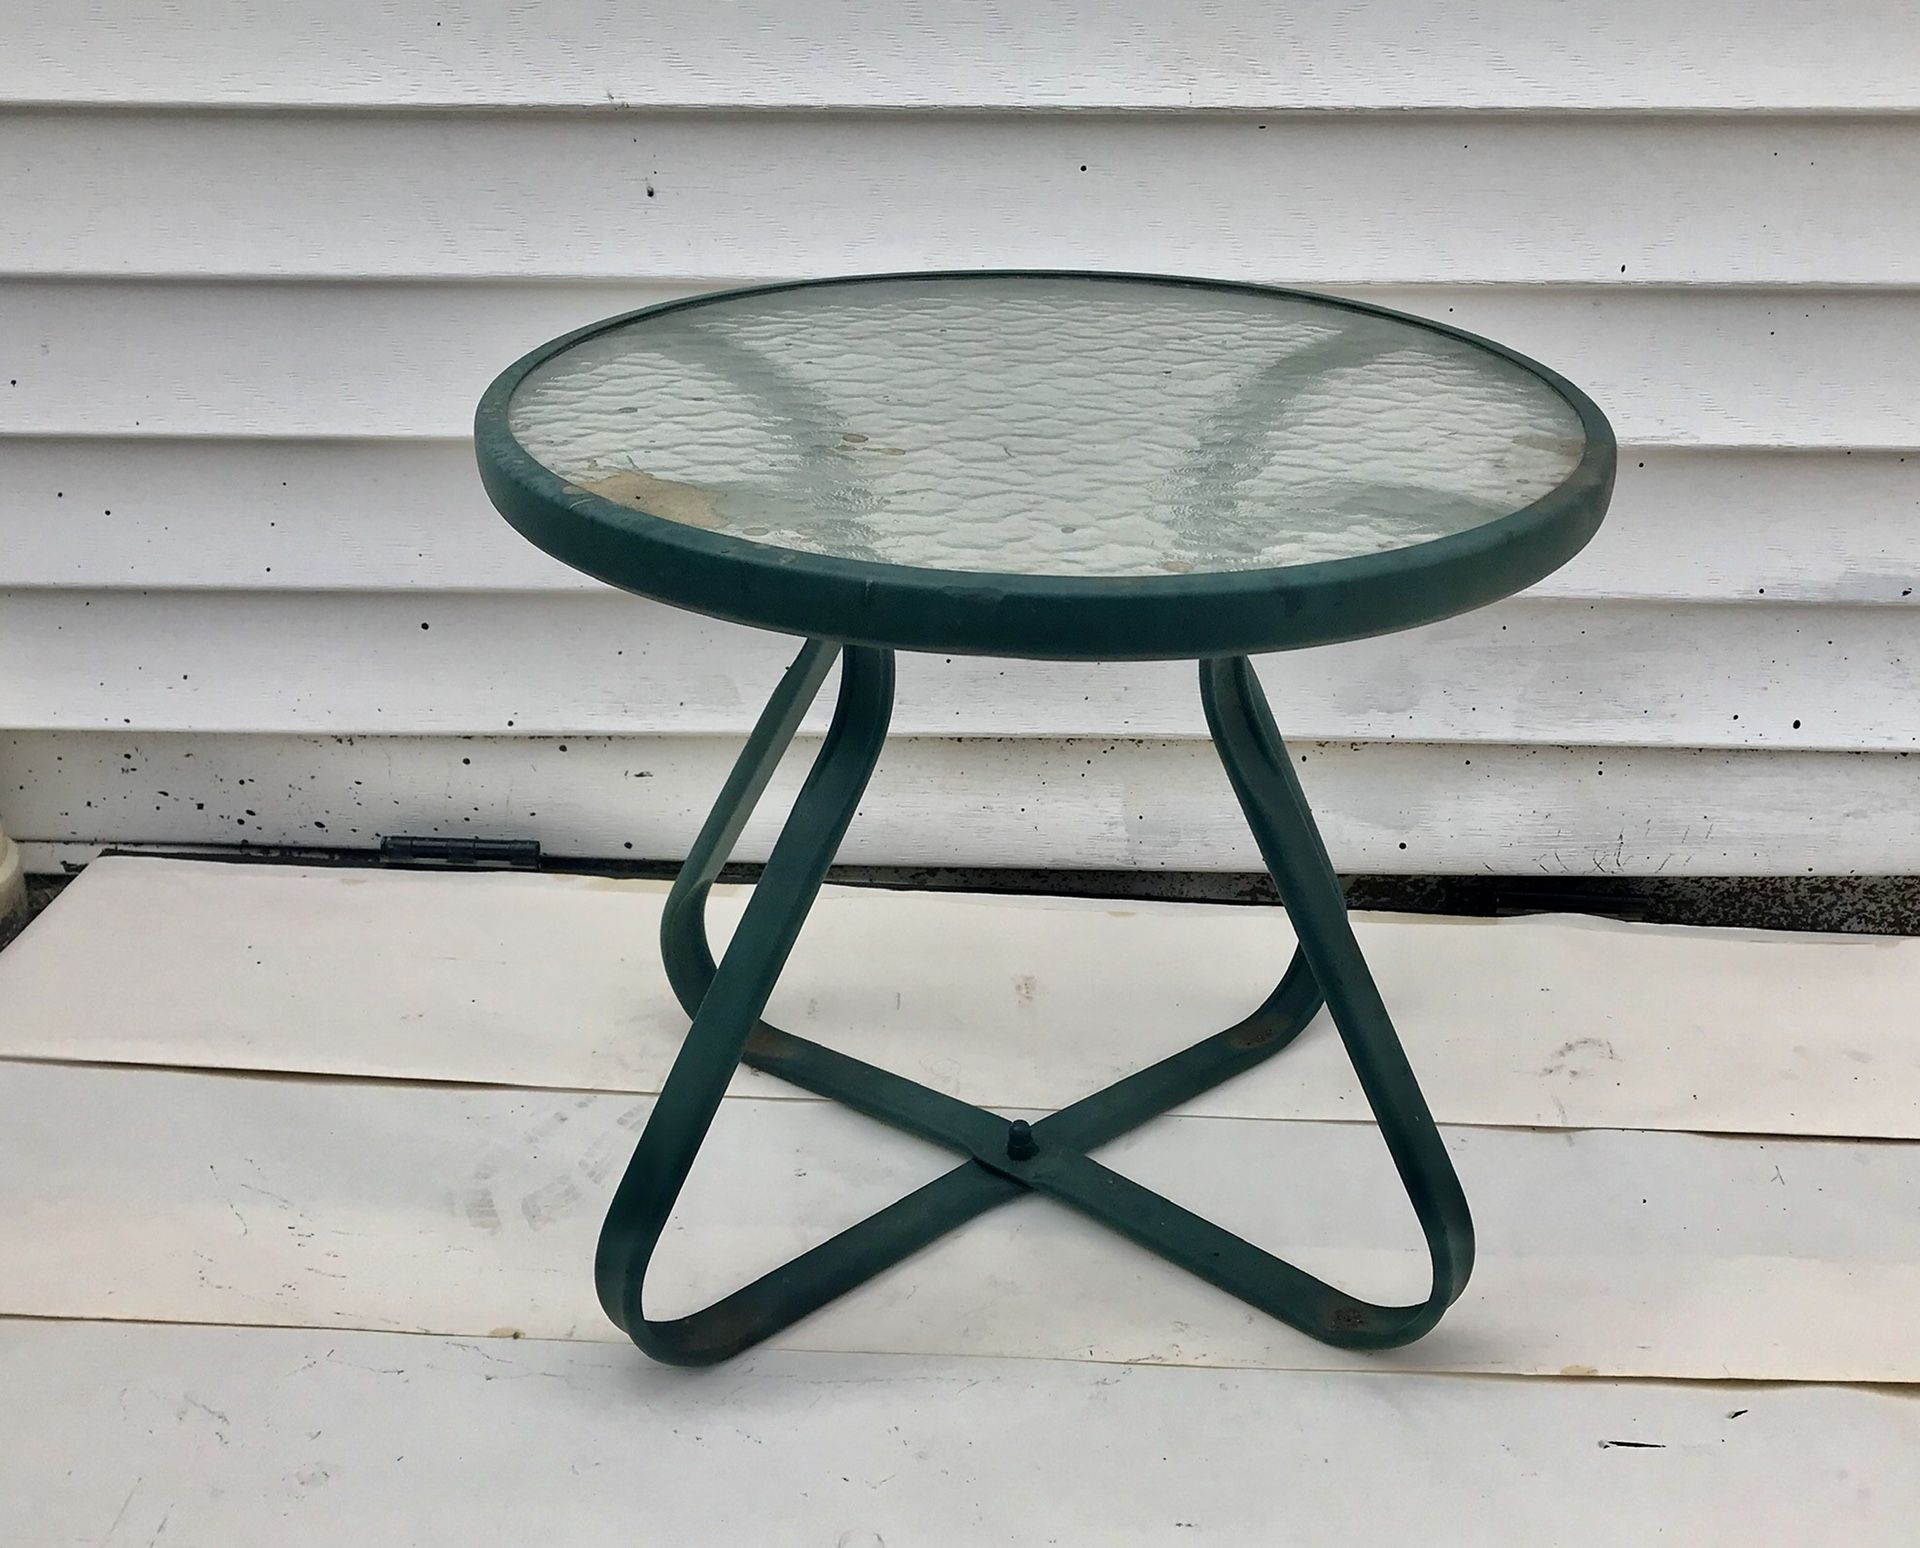 Nice patio side table for drinks or plants